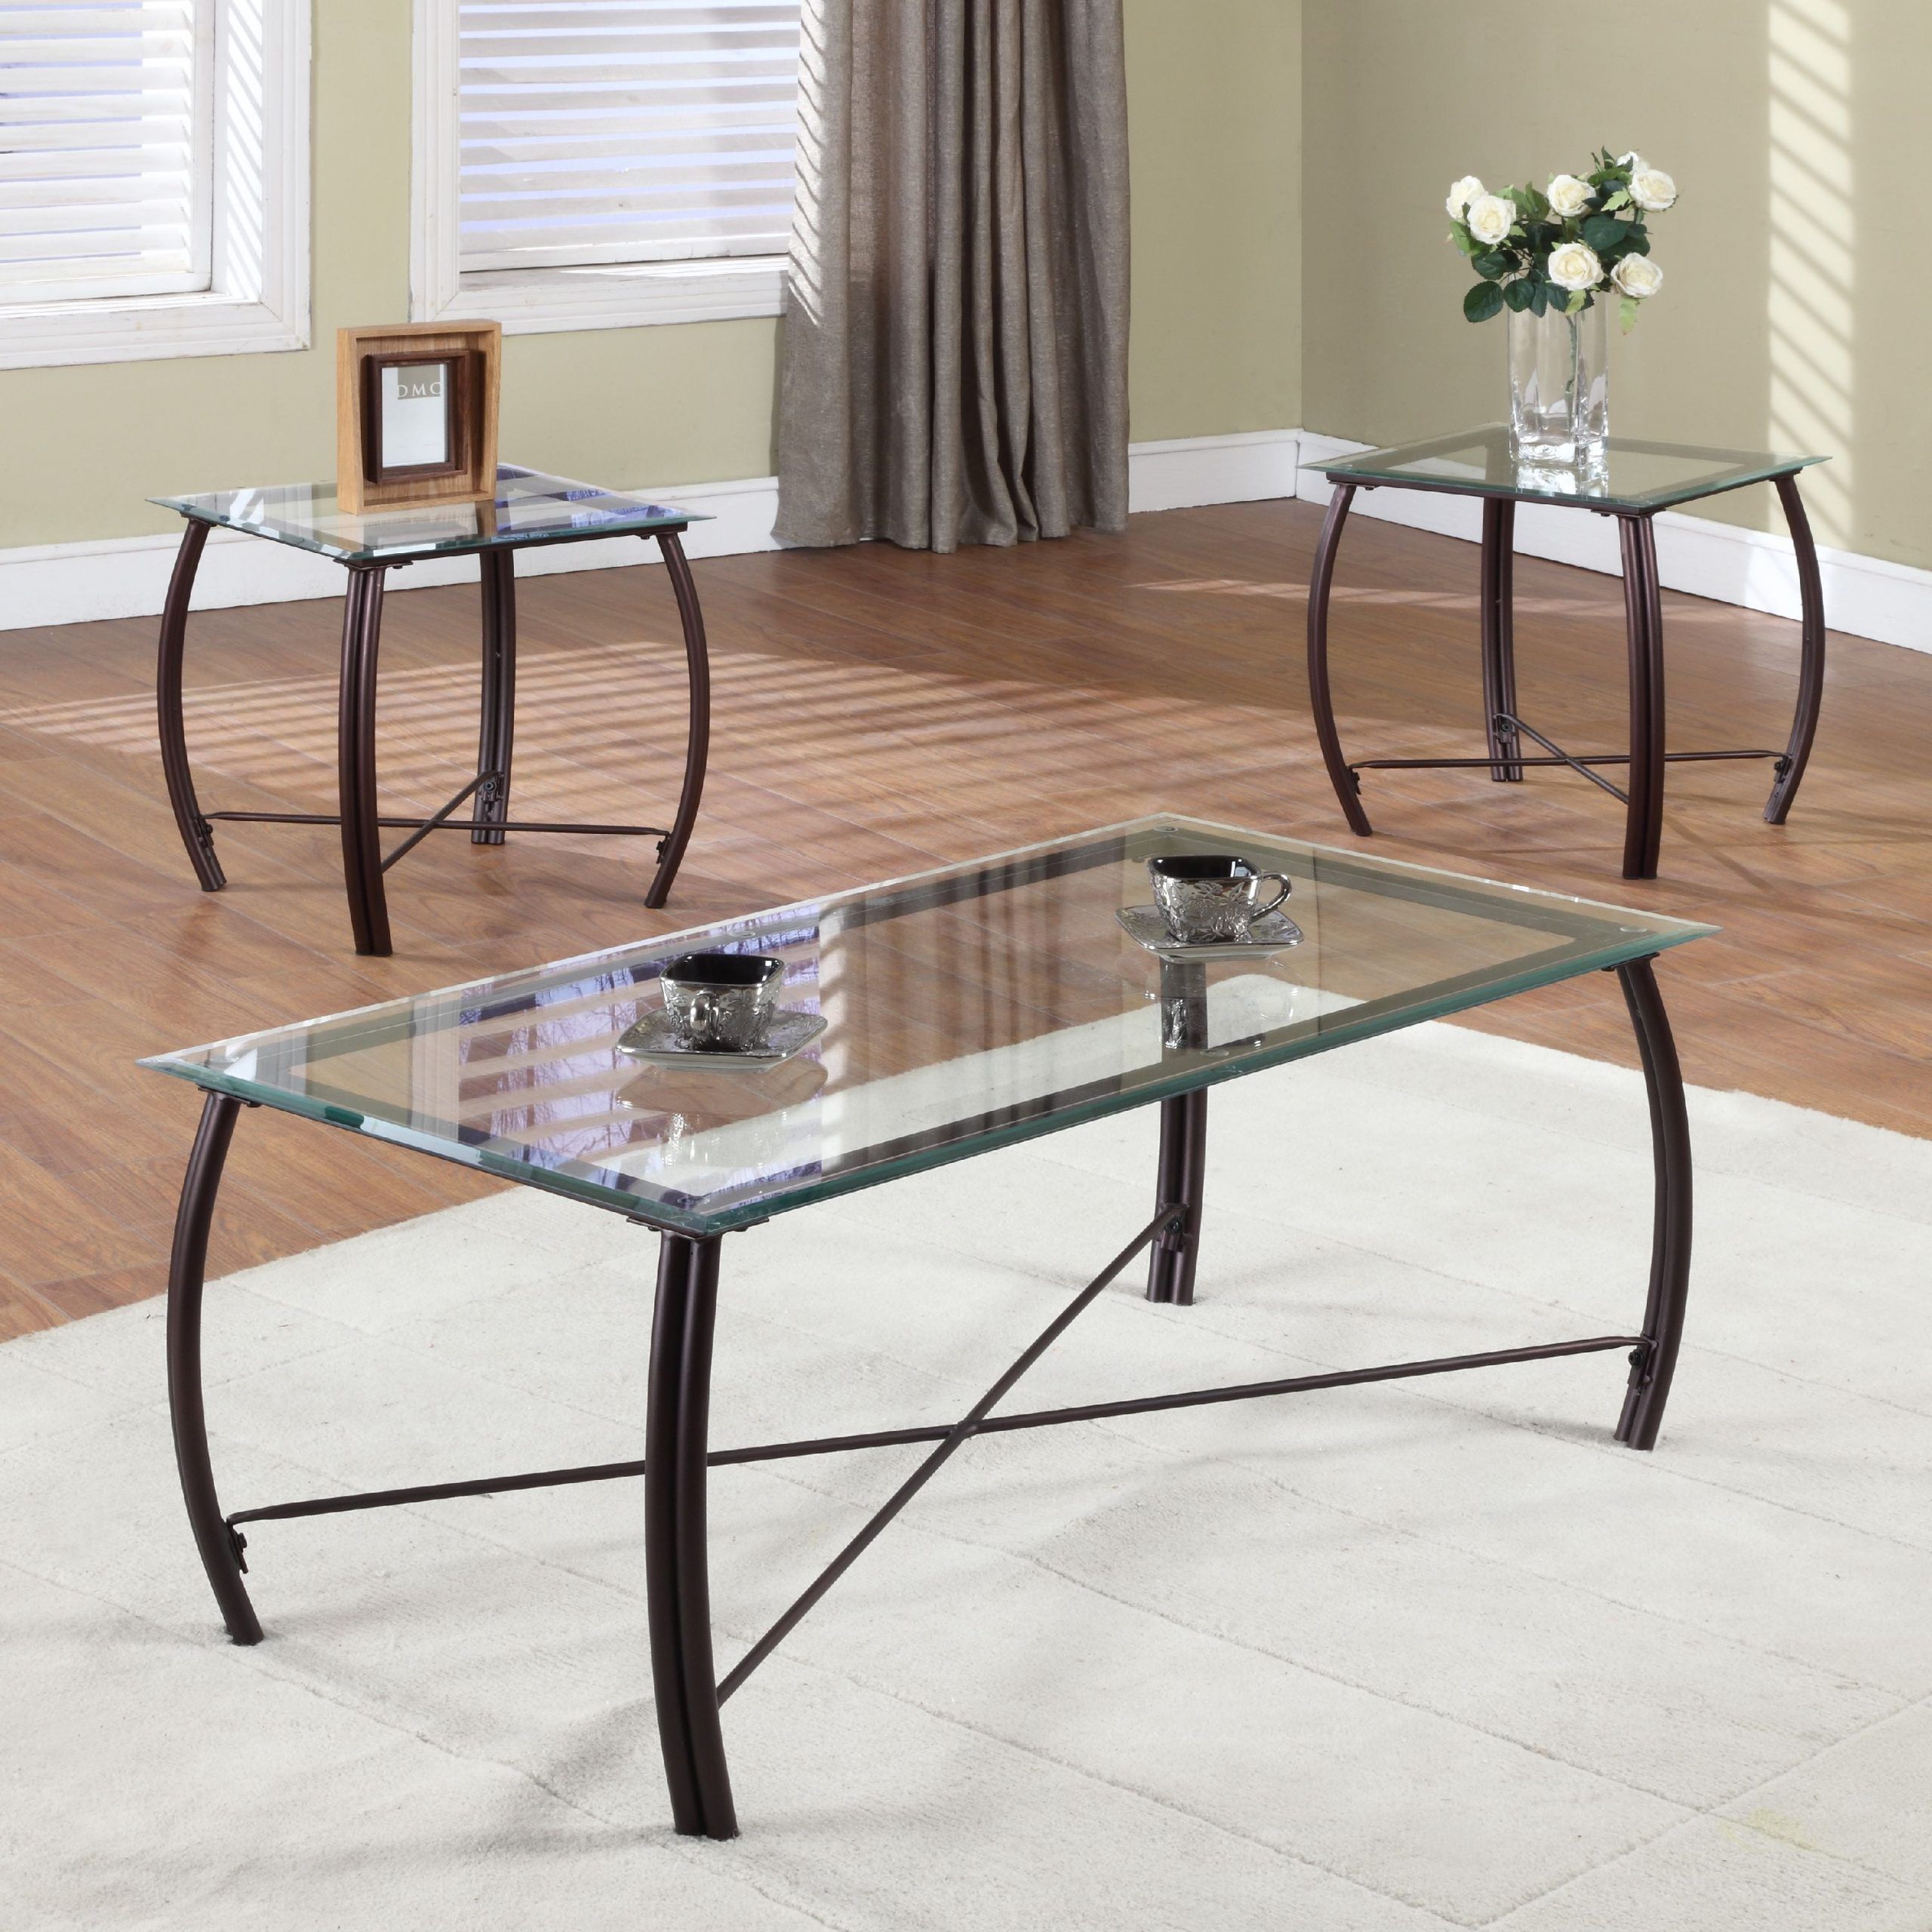 Paula 3 Piece Coffee Table Set, Copper Metal Frames & Beveled Glass Pertaining To Most Current Glossy Finished Metal Coffee Tables (View 13 of 15)